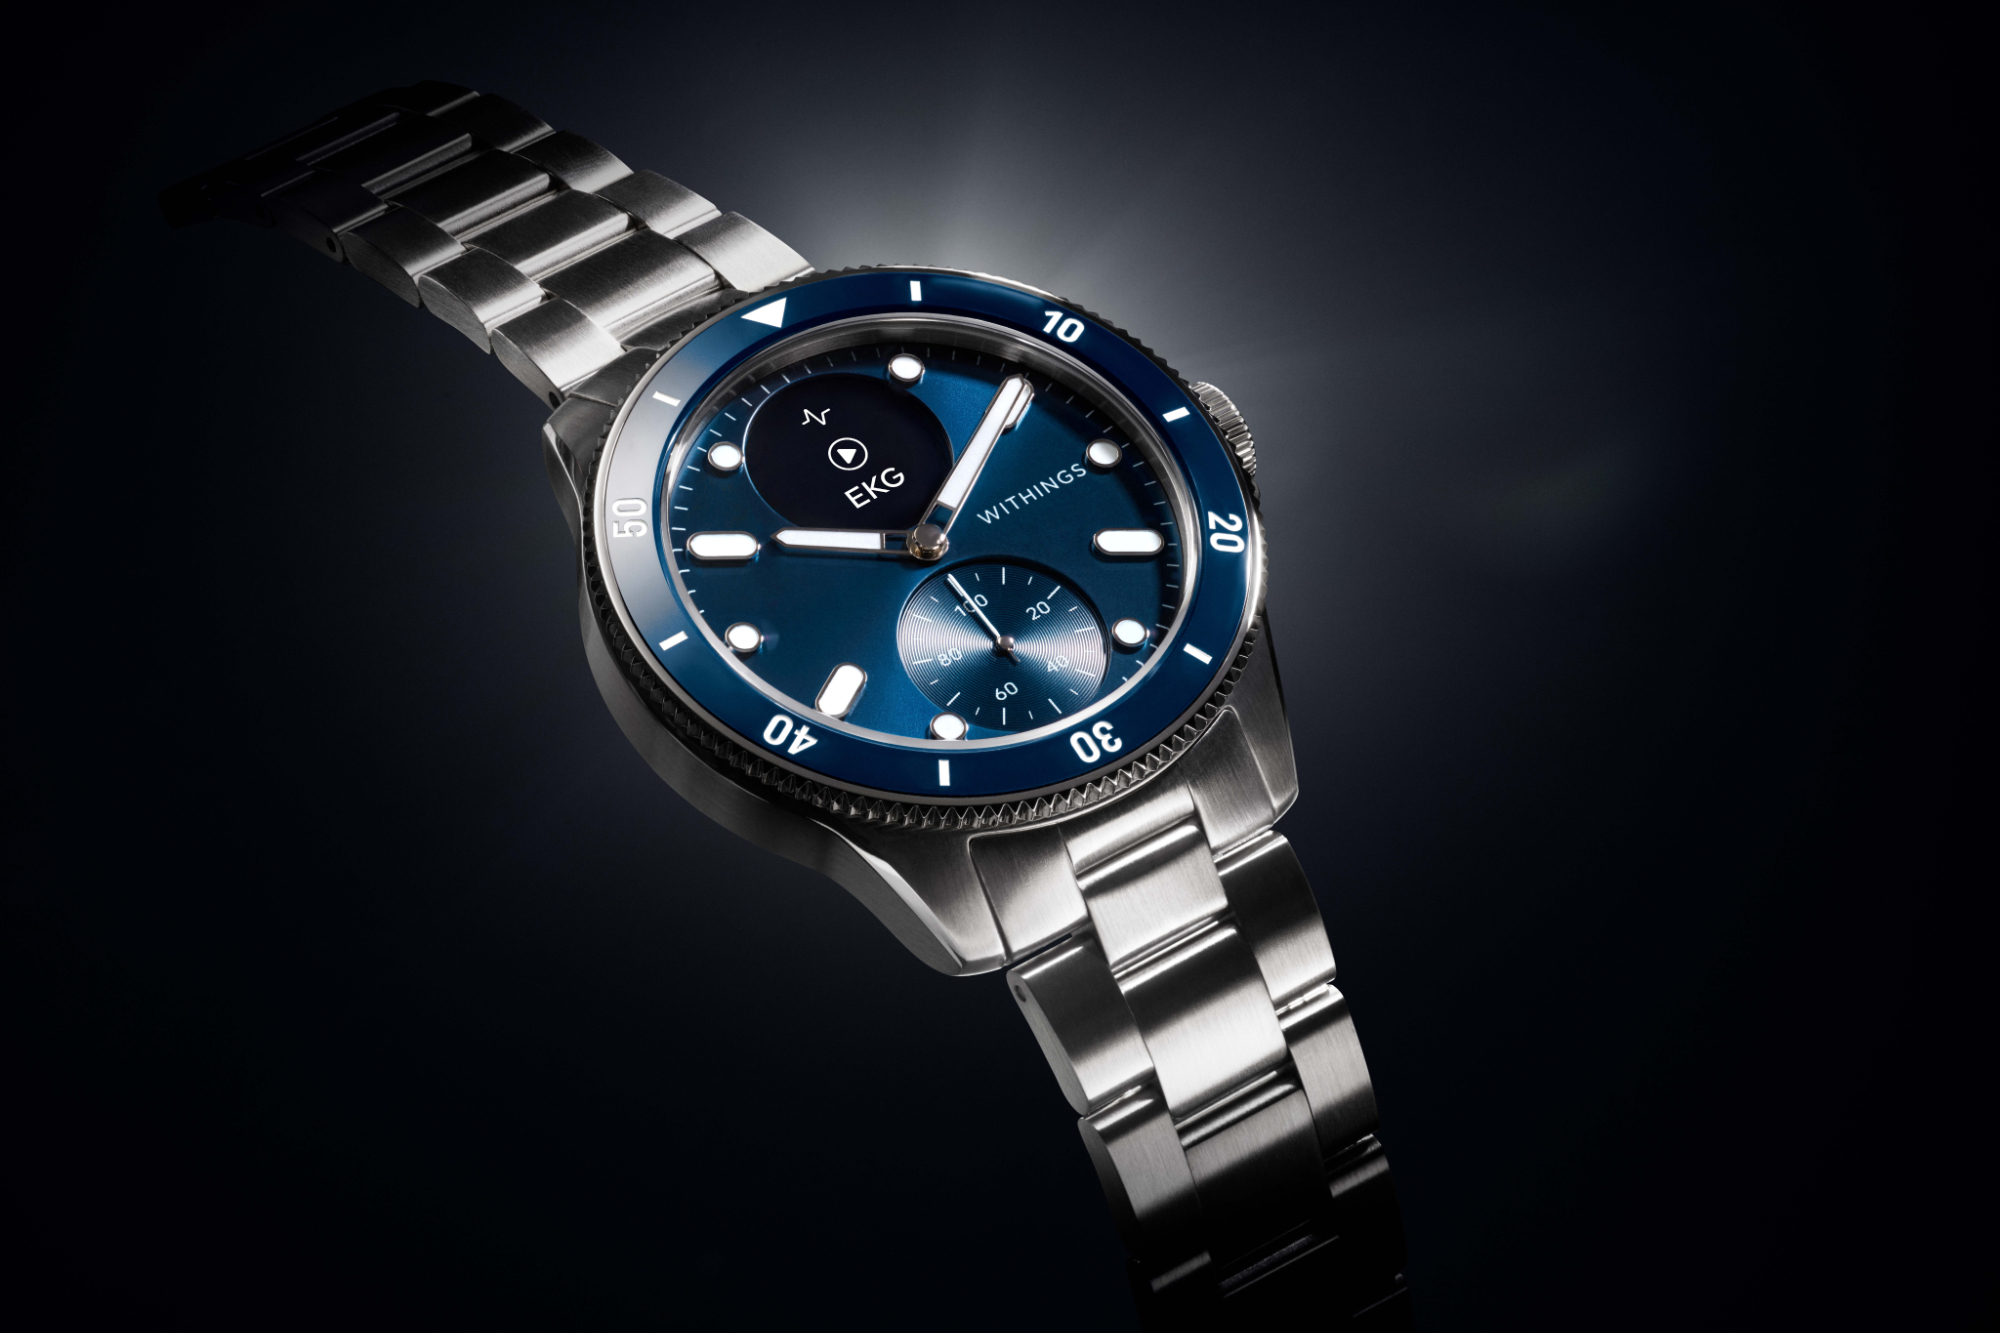 A render of the Withings ScanWatch Nova watch.